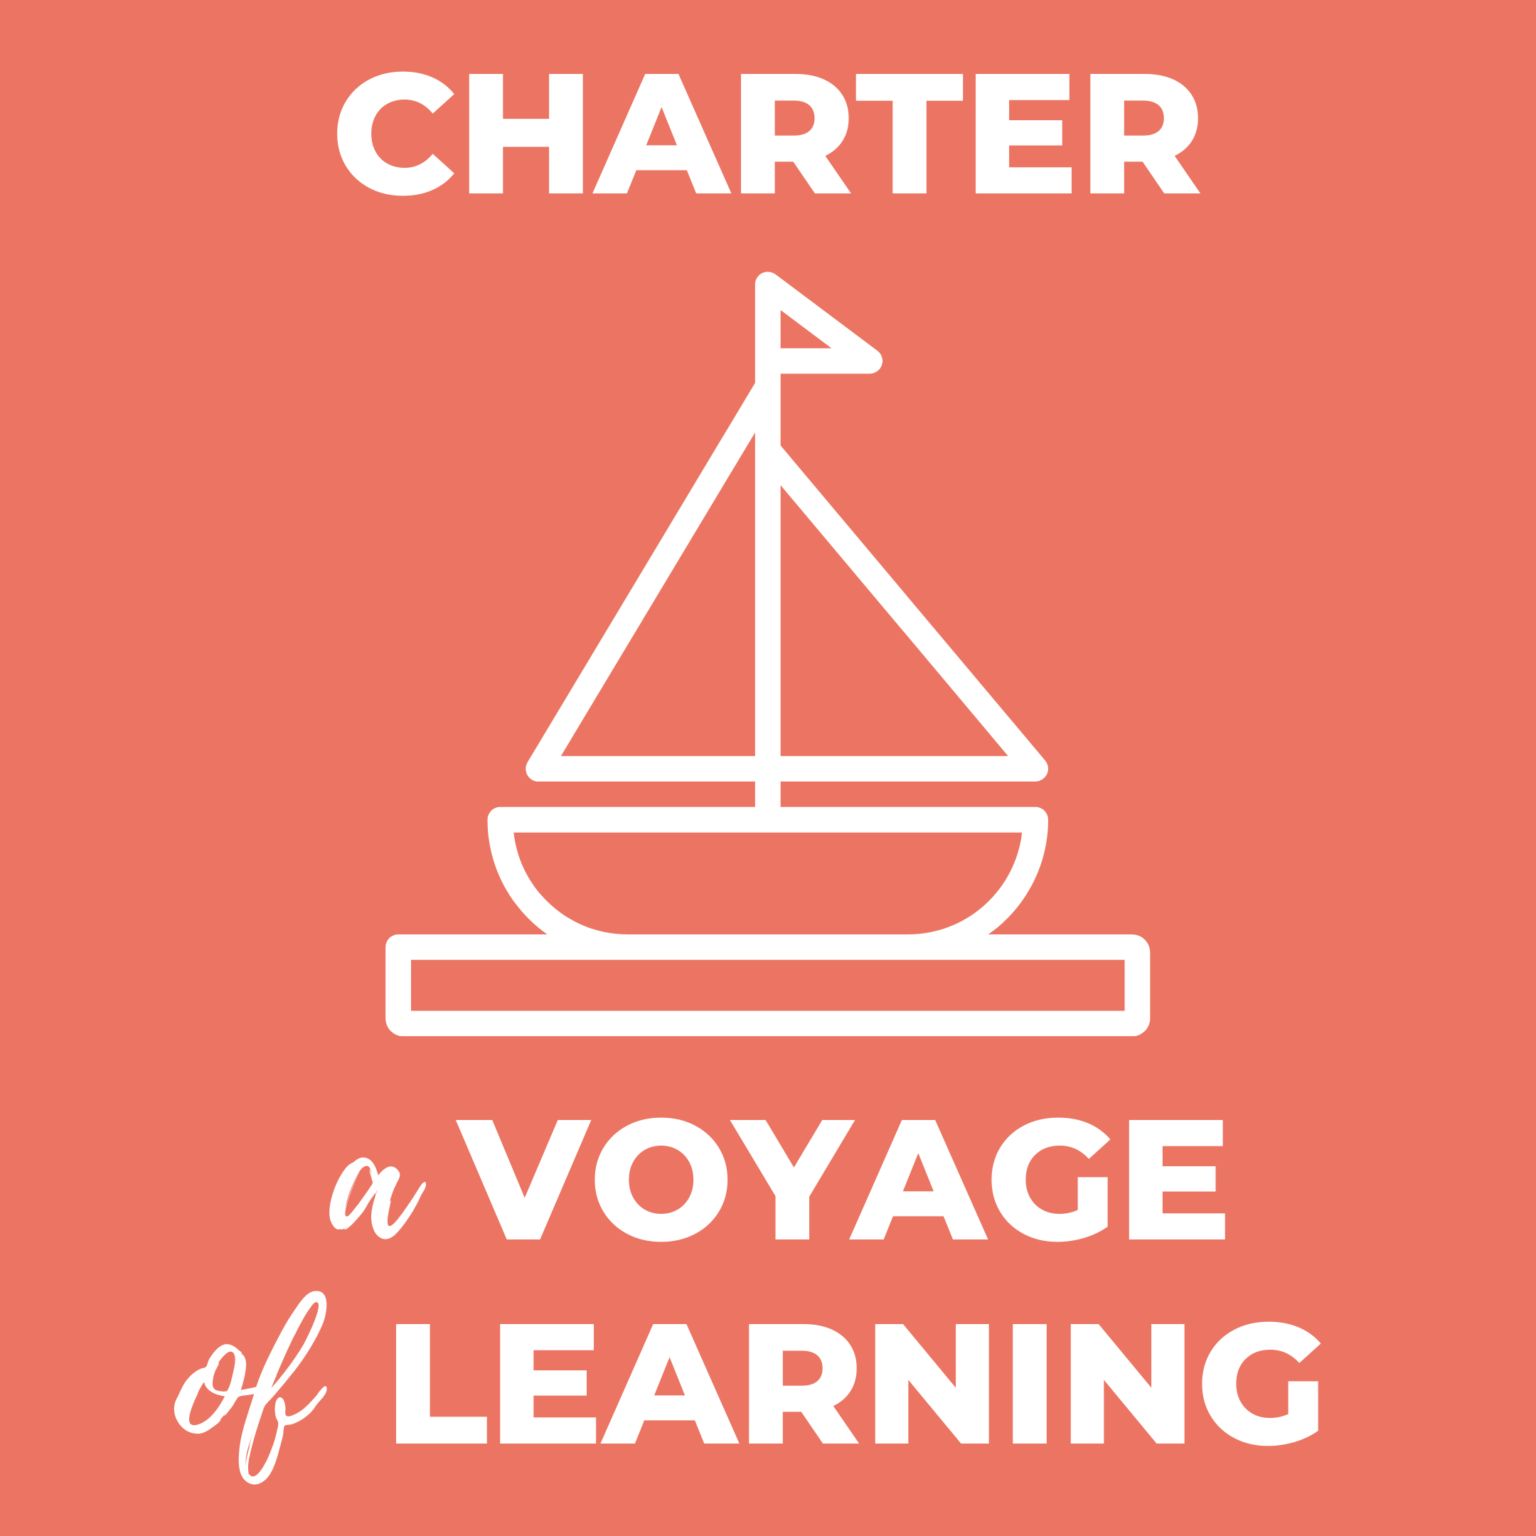 Charter a Voyage of Learning: Activities That Families Can Do at Home While Participating in Distance Learning or Homeschooling